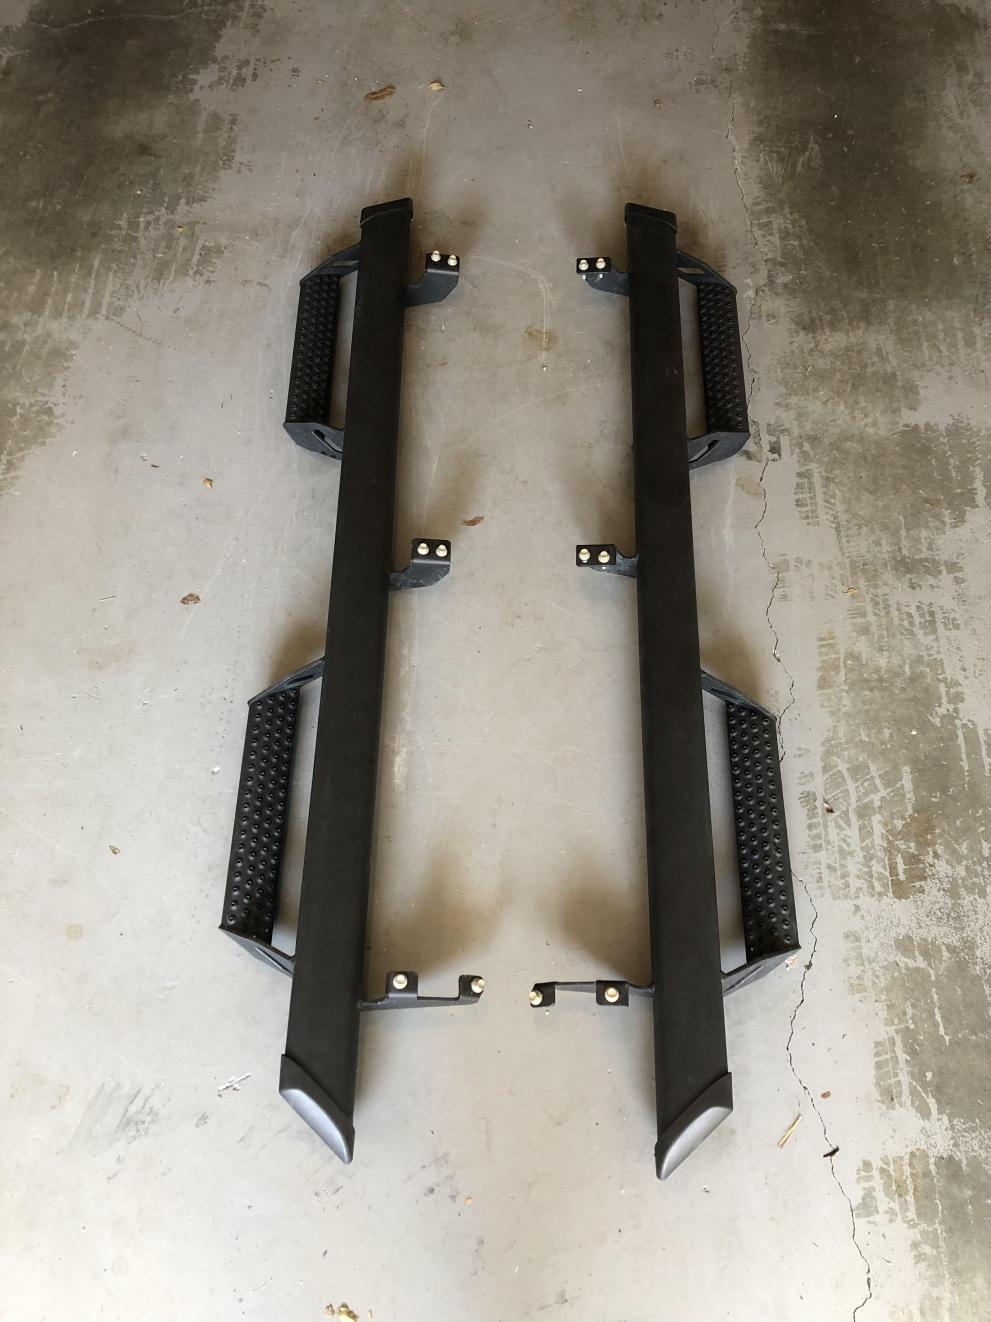 5th Gen For Sale/Wanted Thread-step-bars-2-jpg